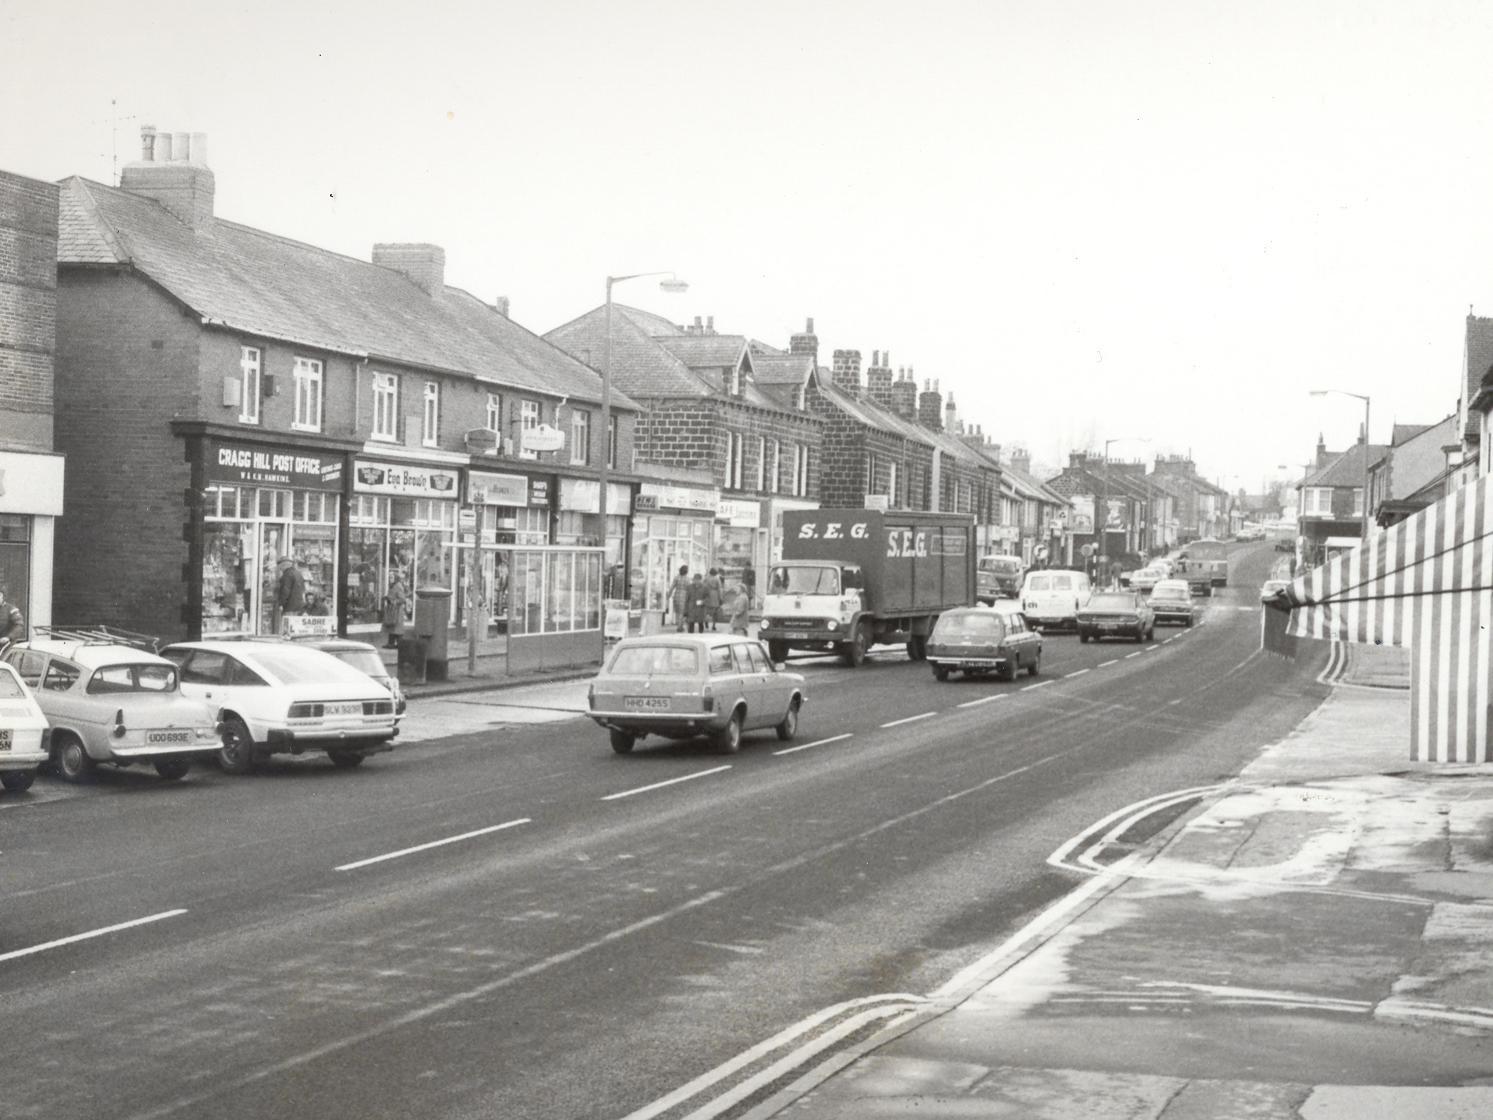 Enjoy these unseen photos of Horsforth.